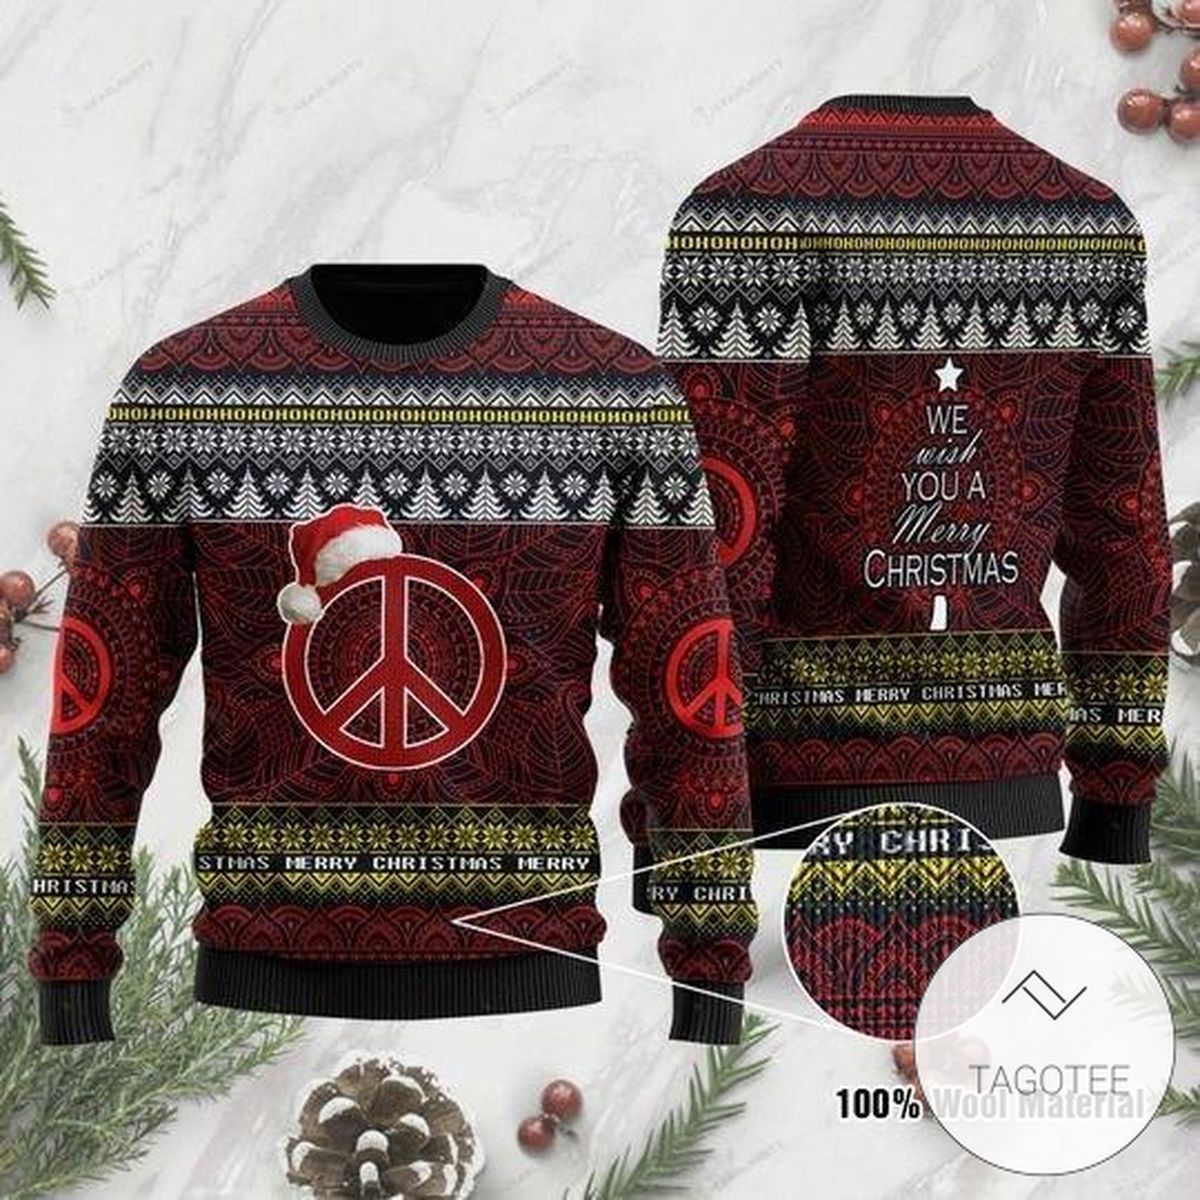 New 2021 We Wish You A Merry Ugly Christmas Sweater